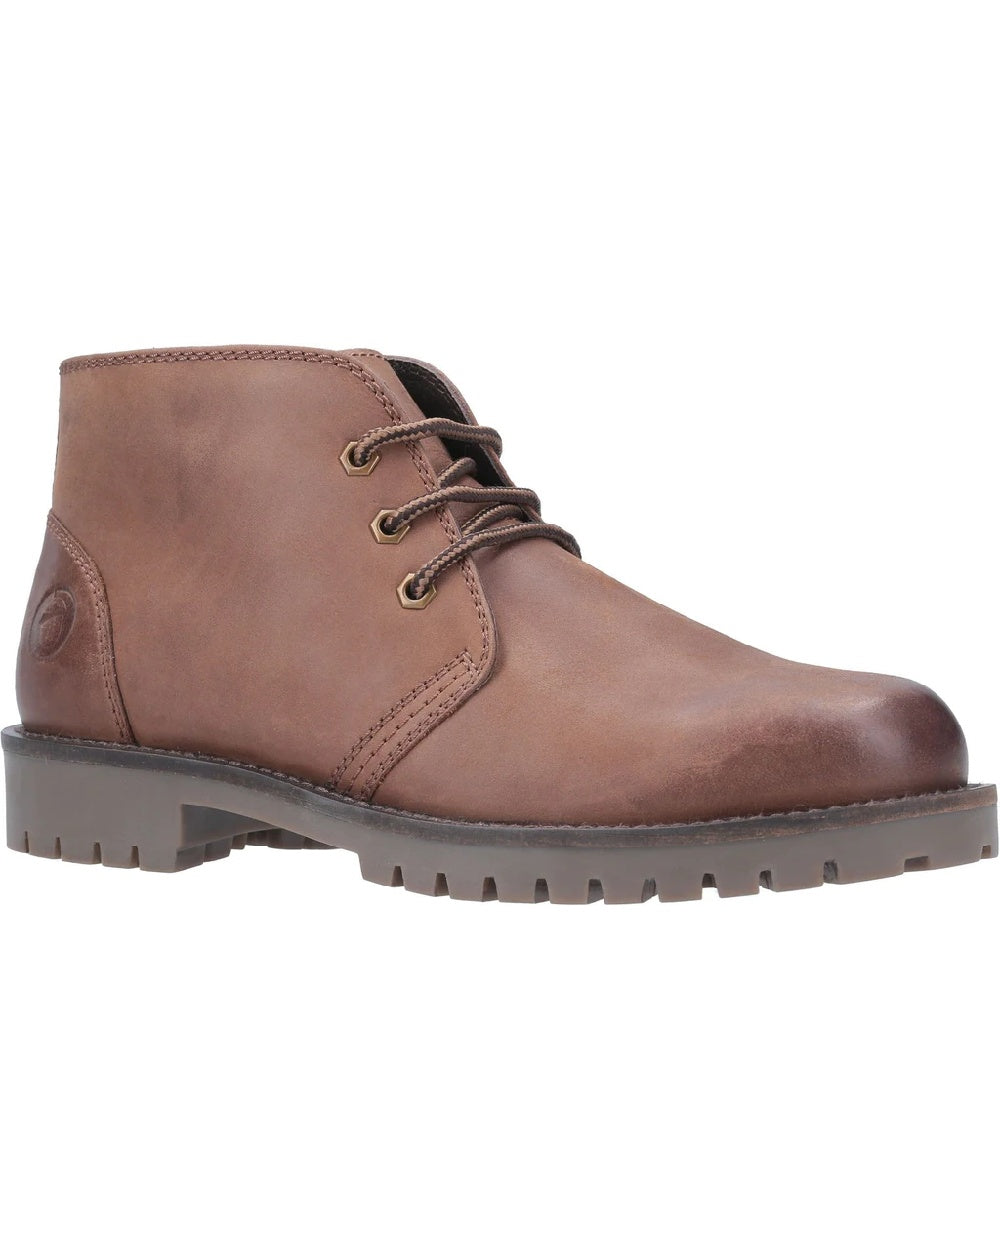 Cotswold Mens Stroud Shoe Boots in Tan 